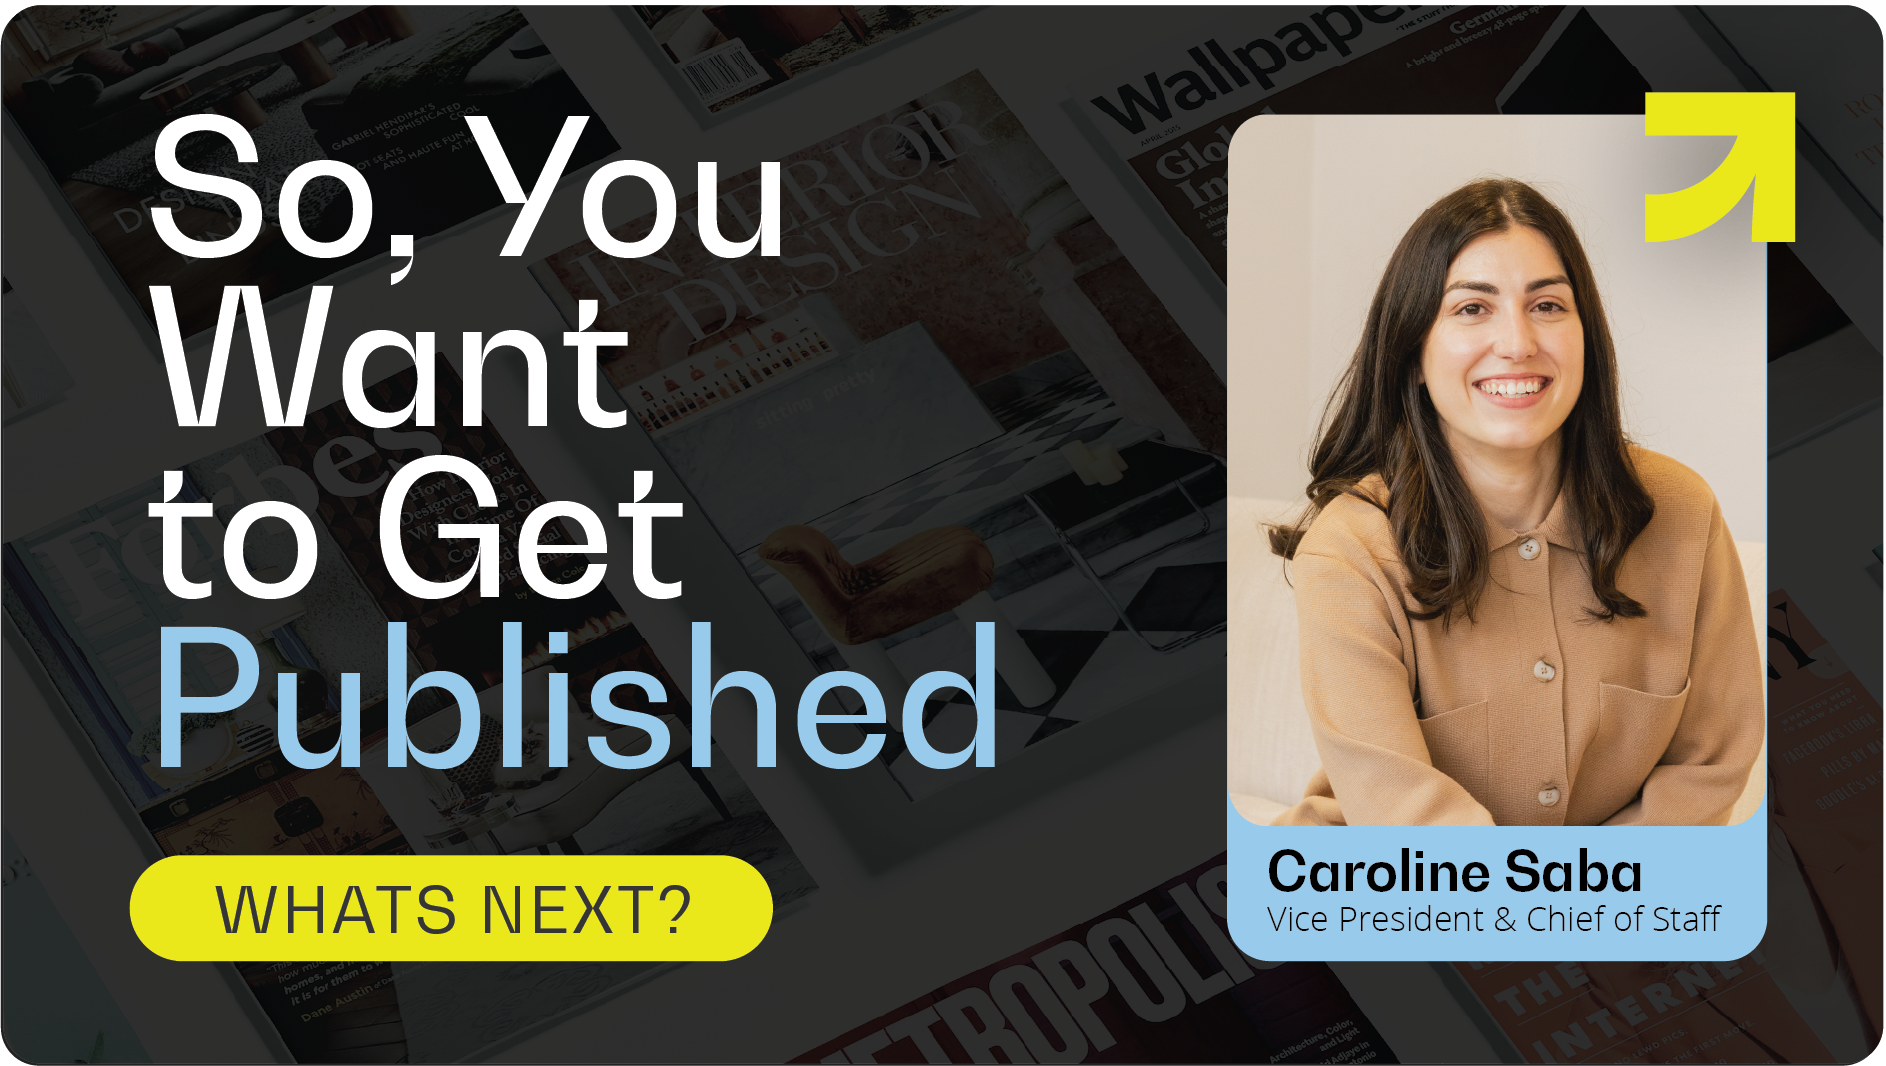 So you want to get published: What’s next? 